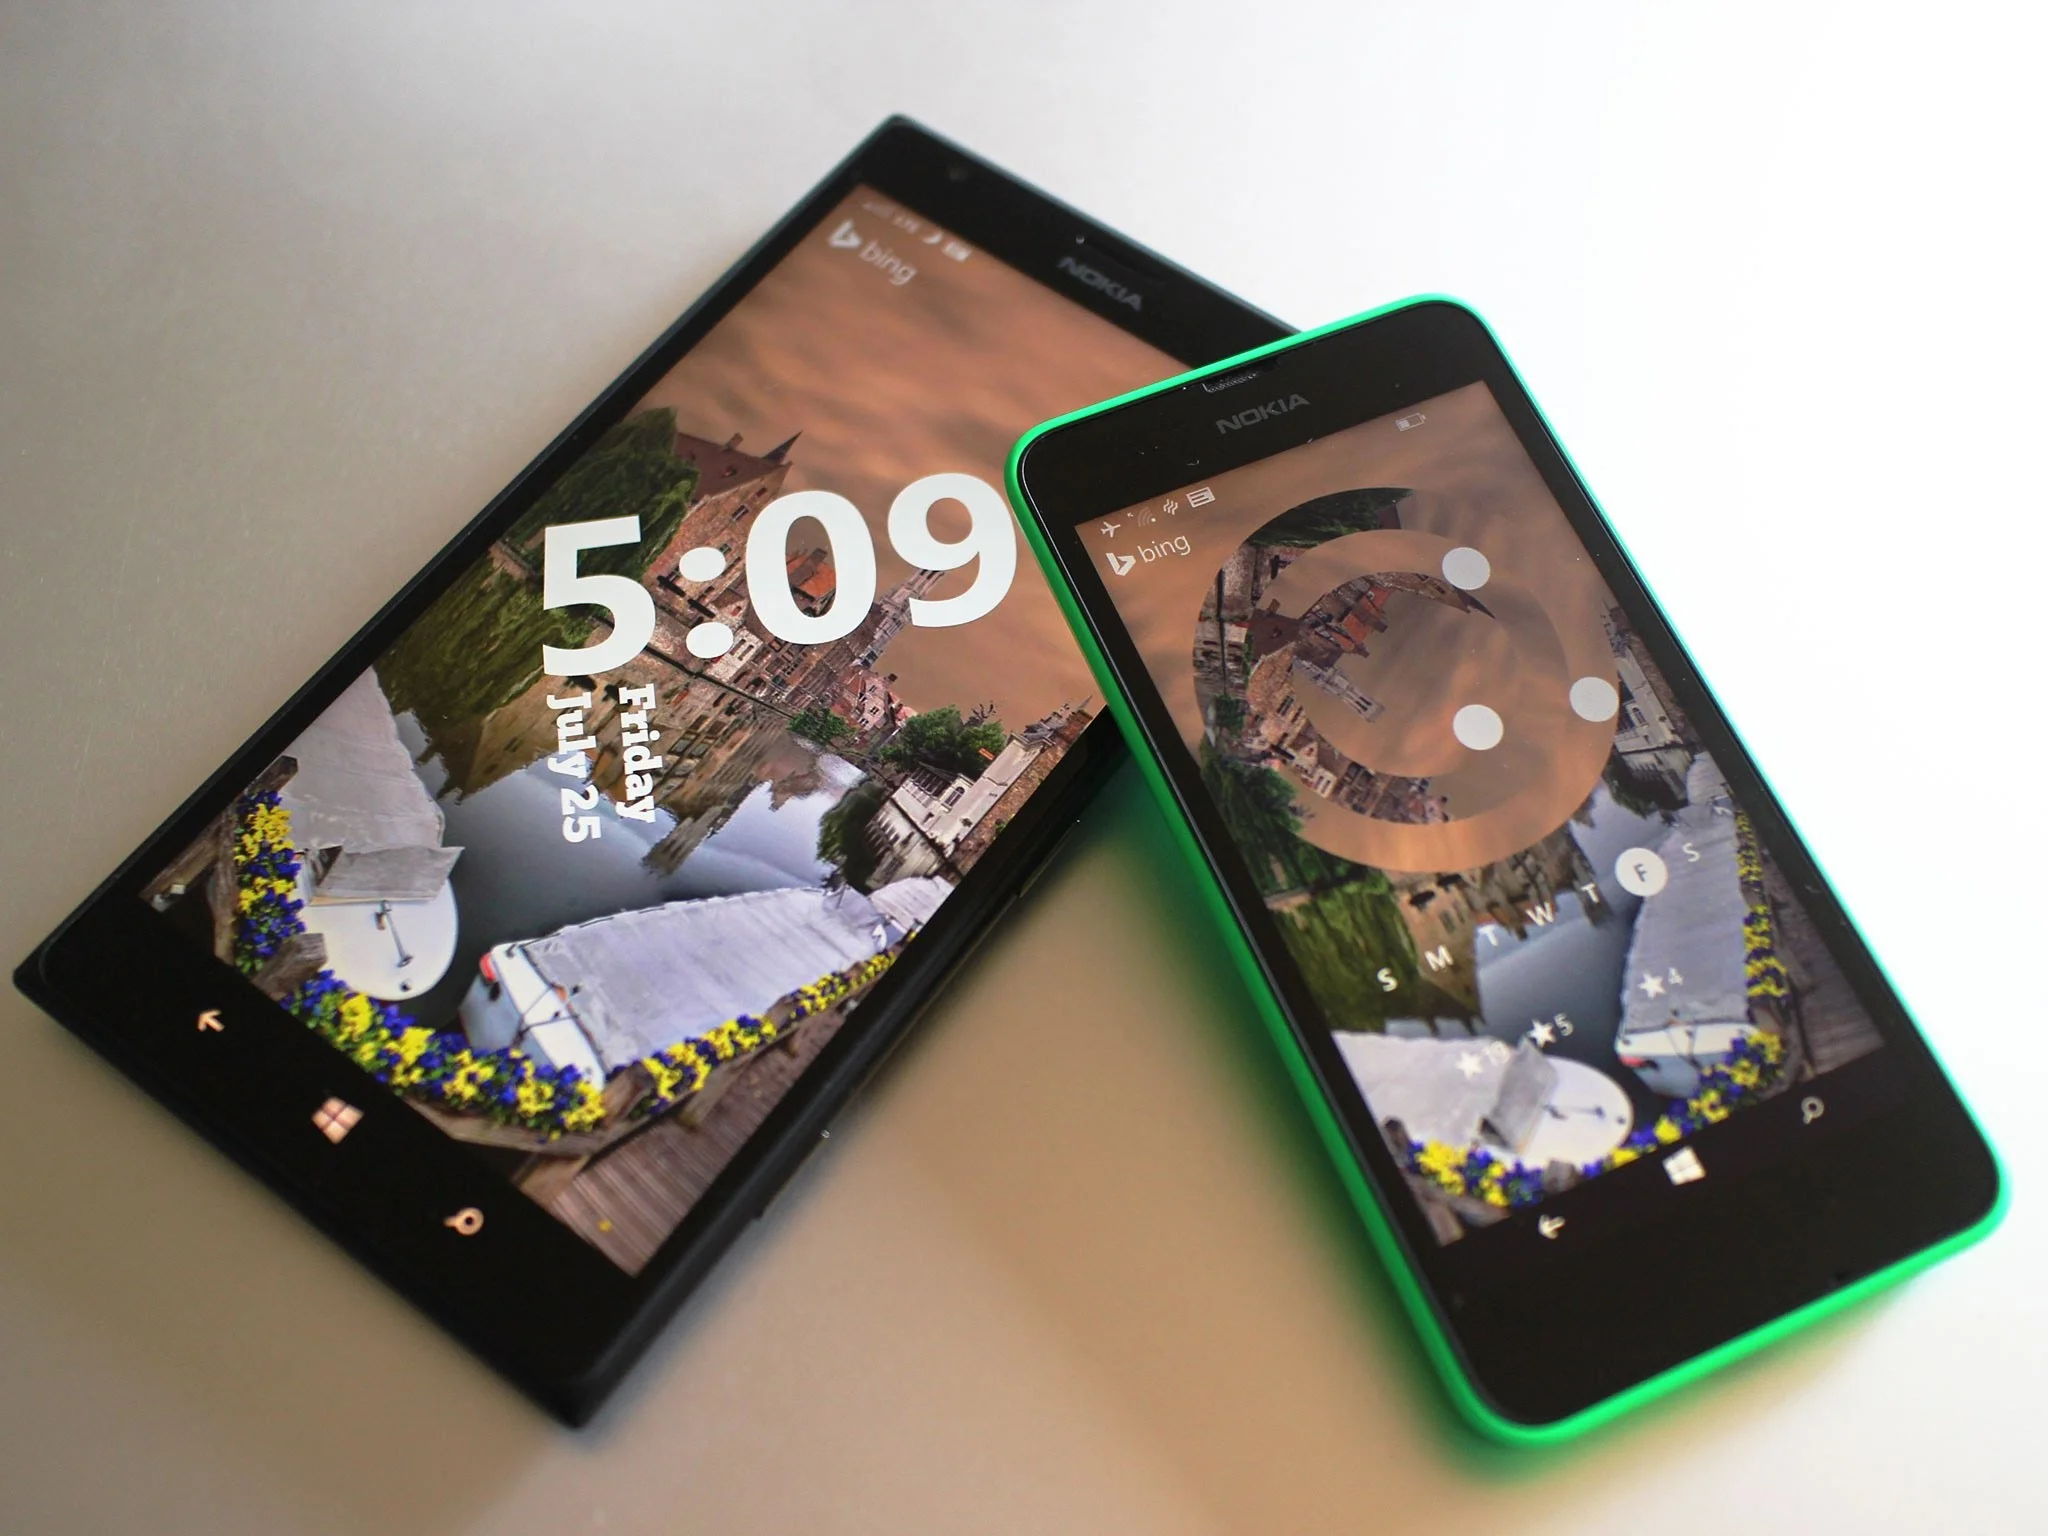 Hands on with the new Live Lock Screen app for Windows Phone 8.1 – YouTube